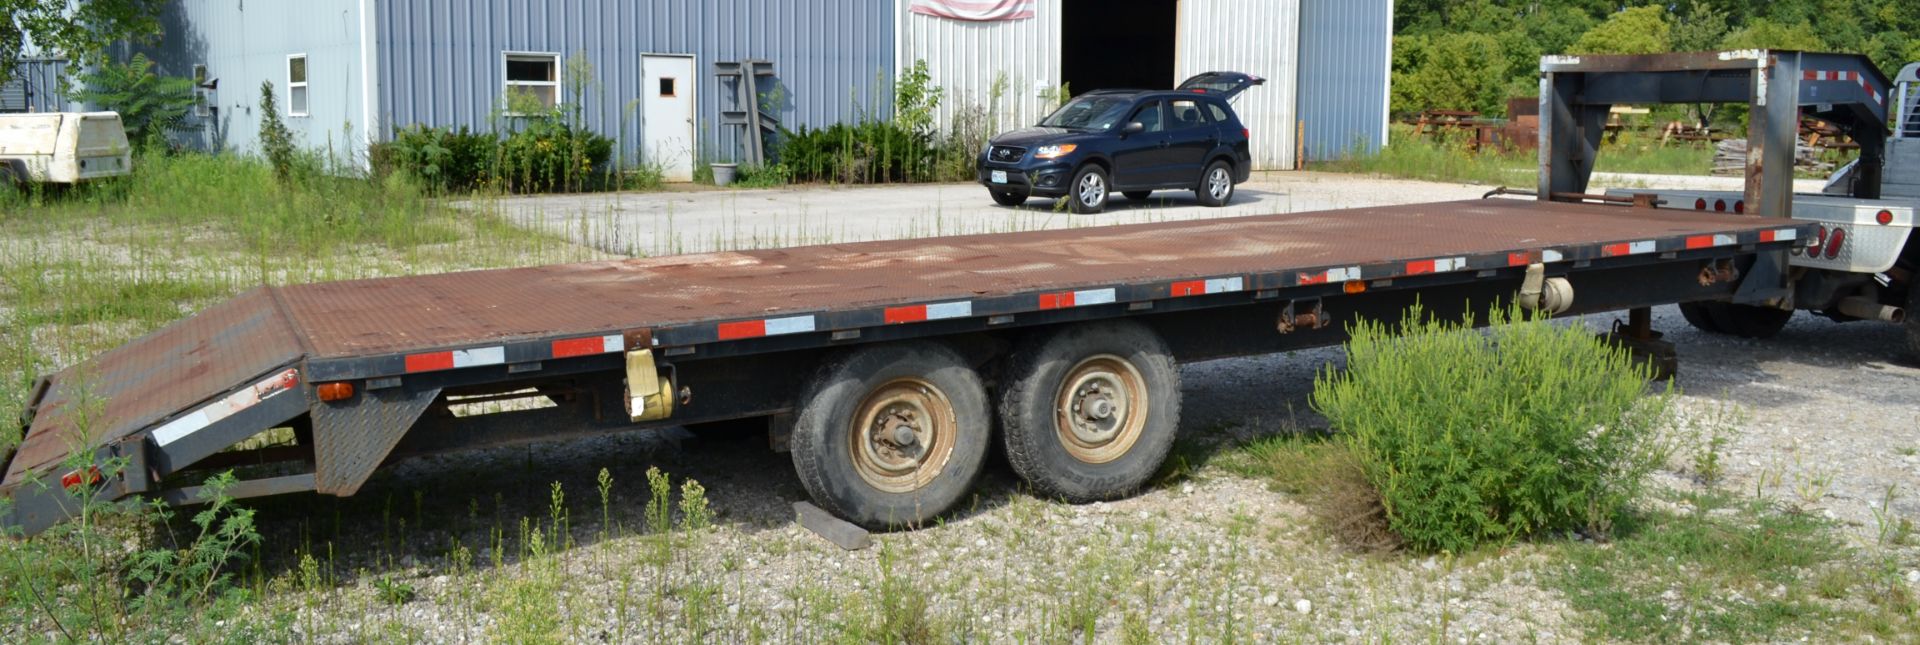 1996 David Utility Trailers 24' Tandem Axle Flatbed Gooseneck Trailer With Dovetail - Image 4 of 5